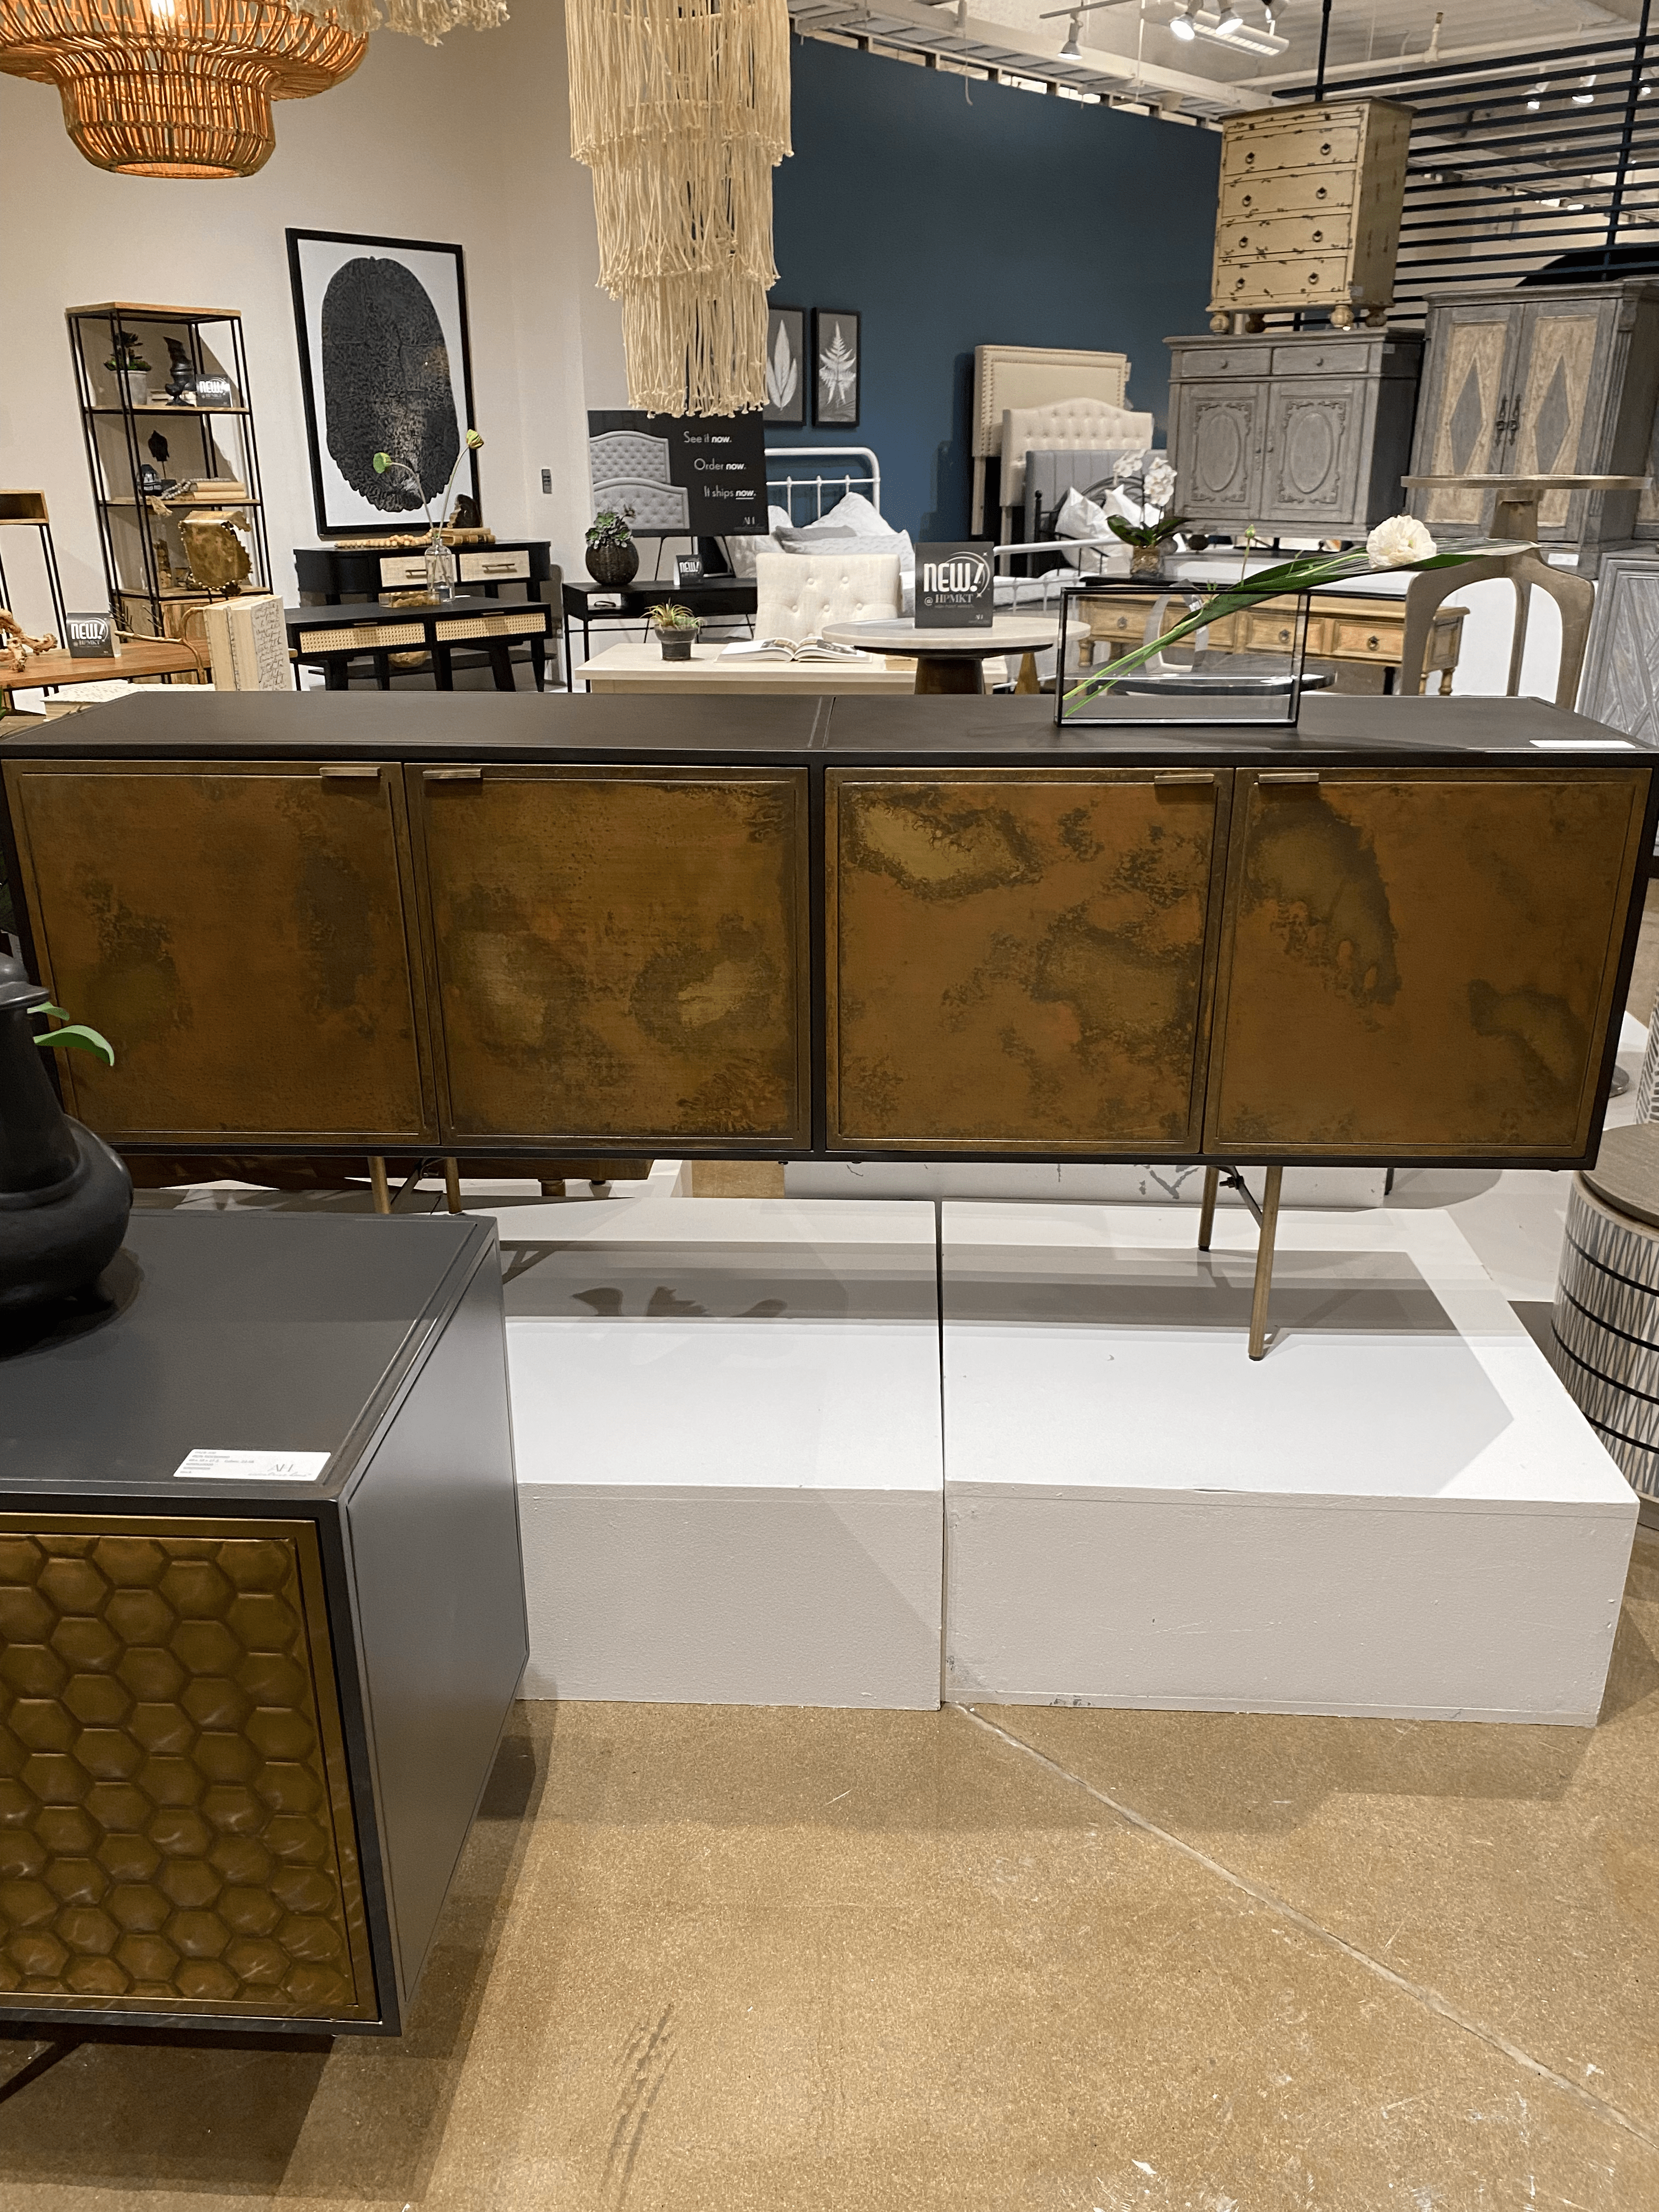 Image of model credenza from High Point Market